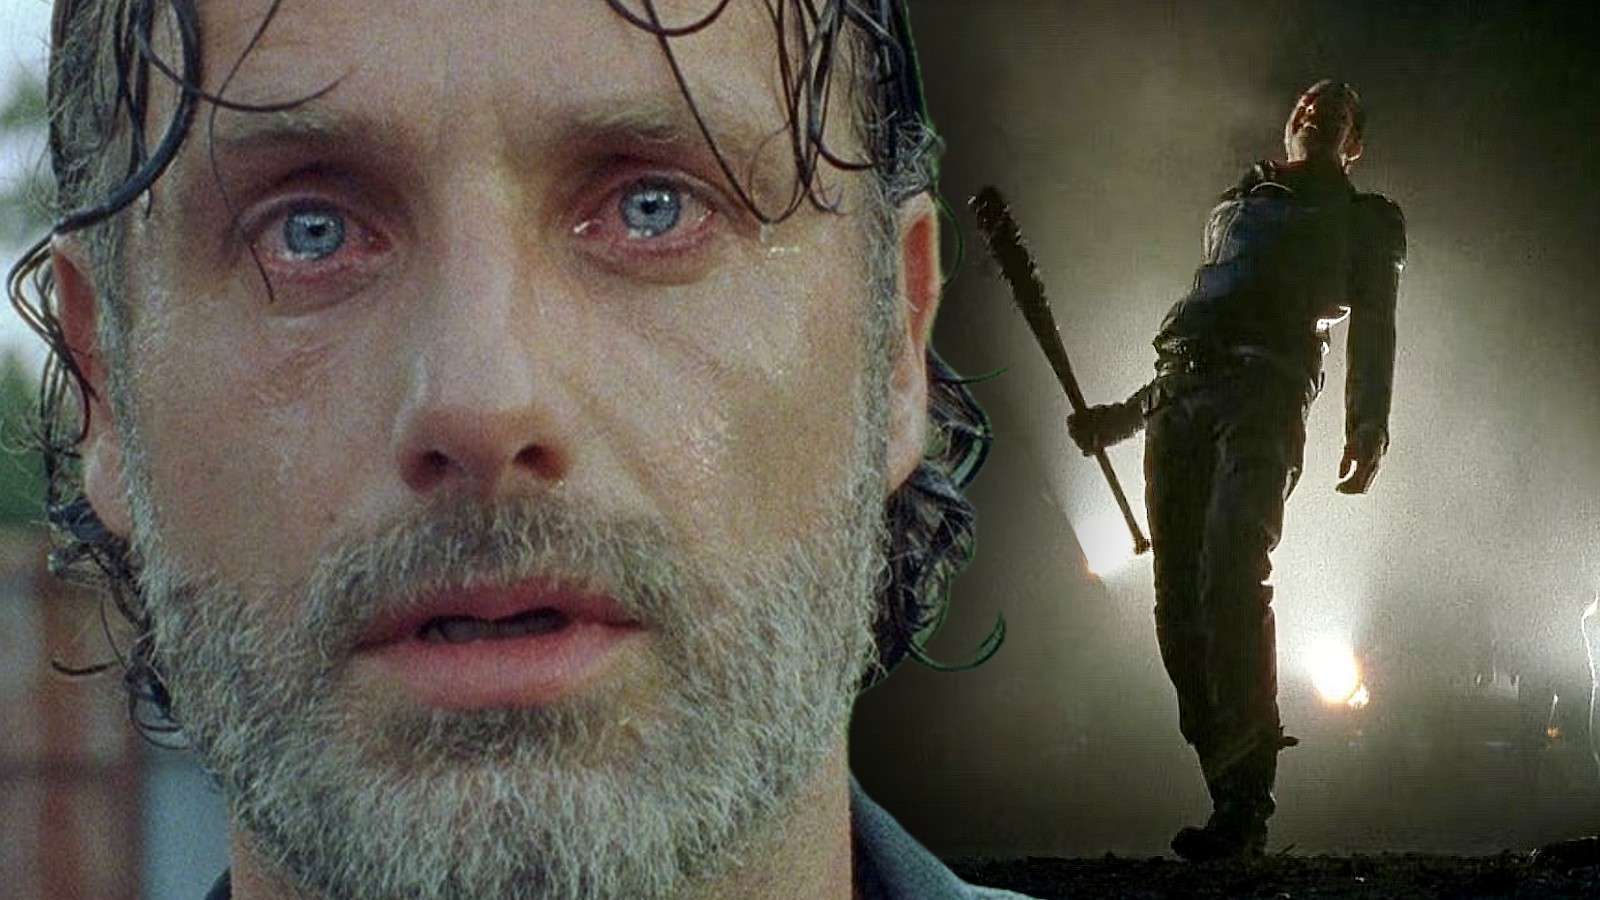 Andrew Lincoln as Rick Grimes and Negan after killing Glenn in The Walking Dead